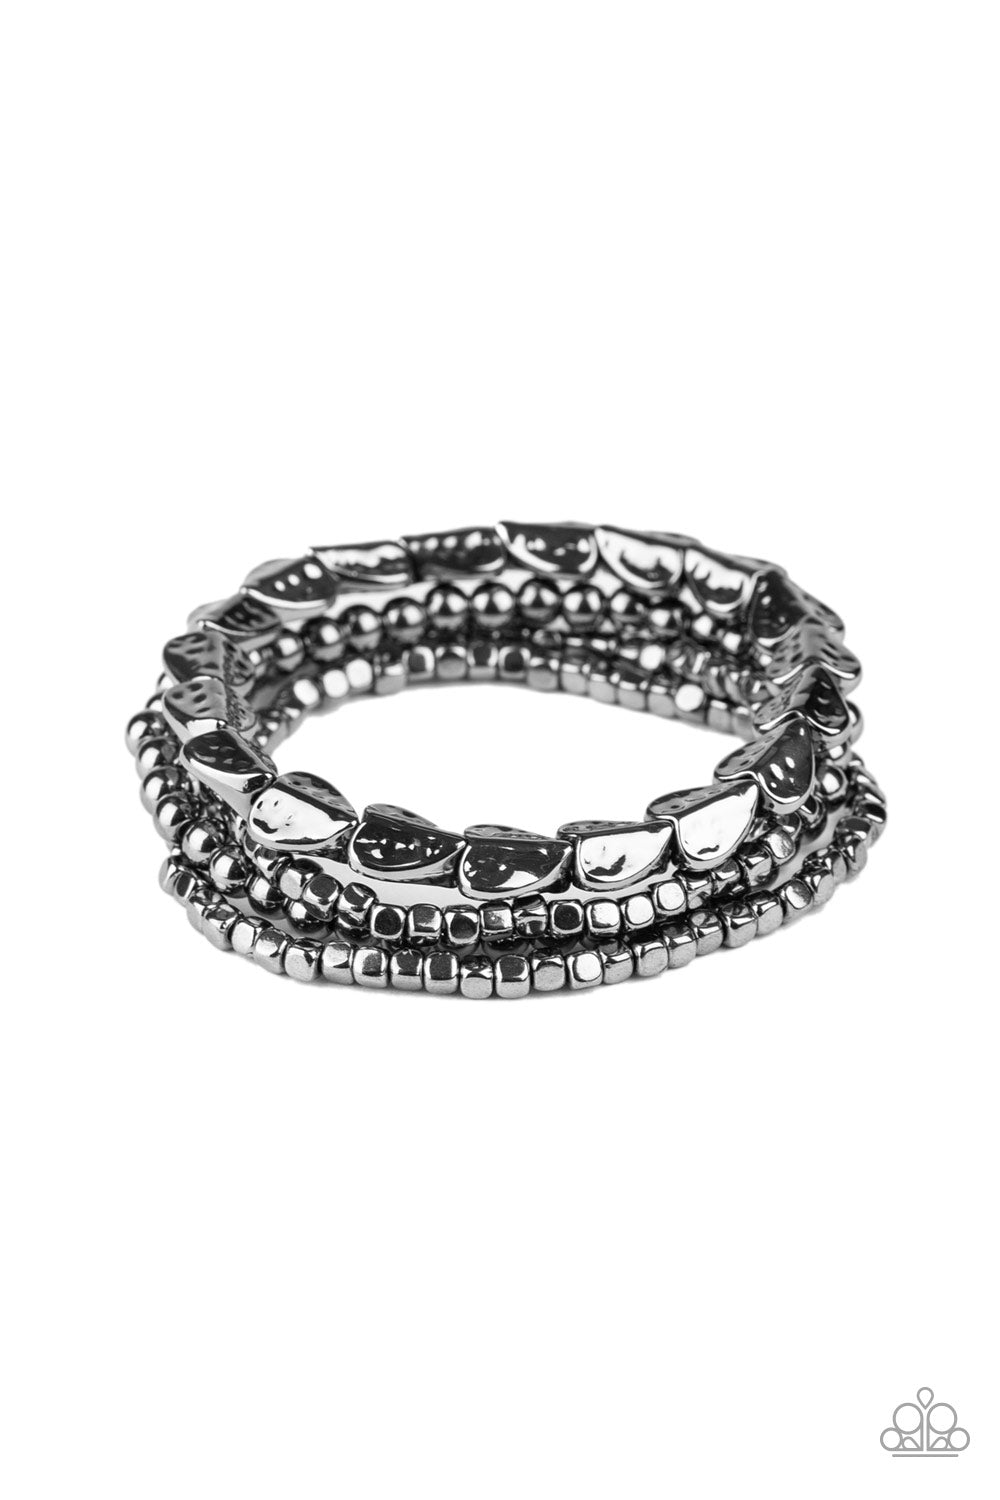 Paparazzi Ancient Heirloom - Black Bracelet - A Finishing Touch 